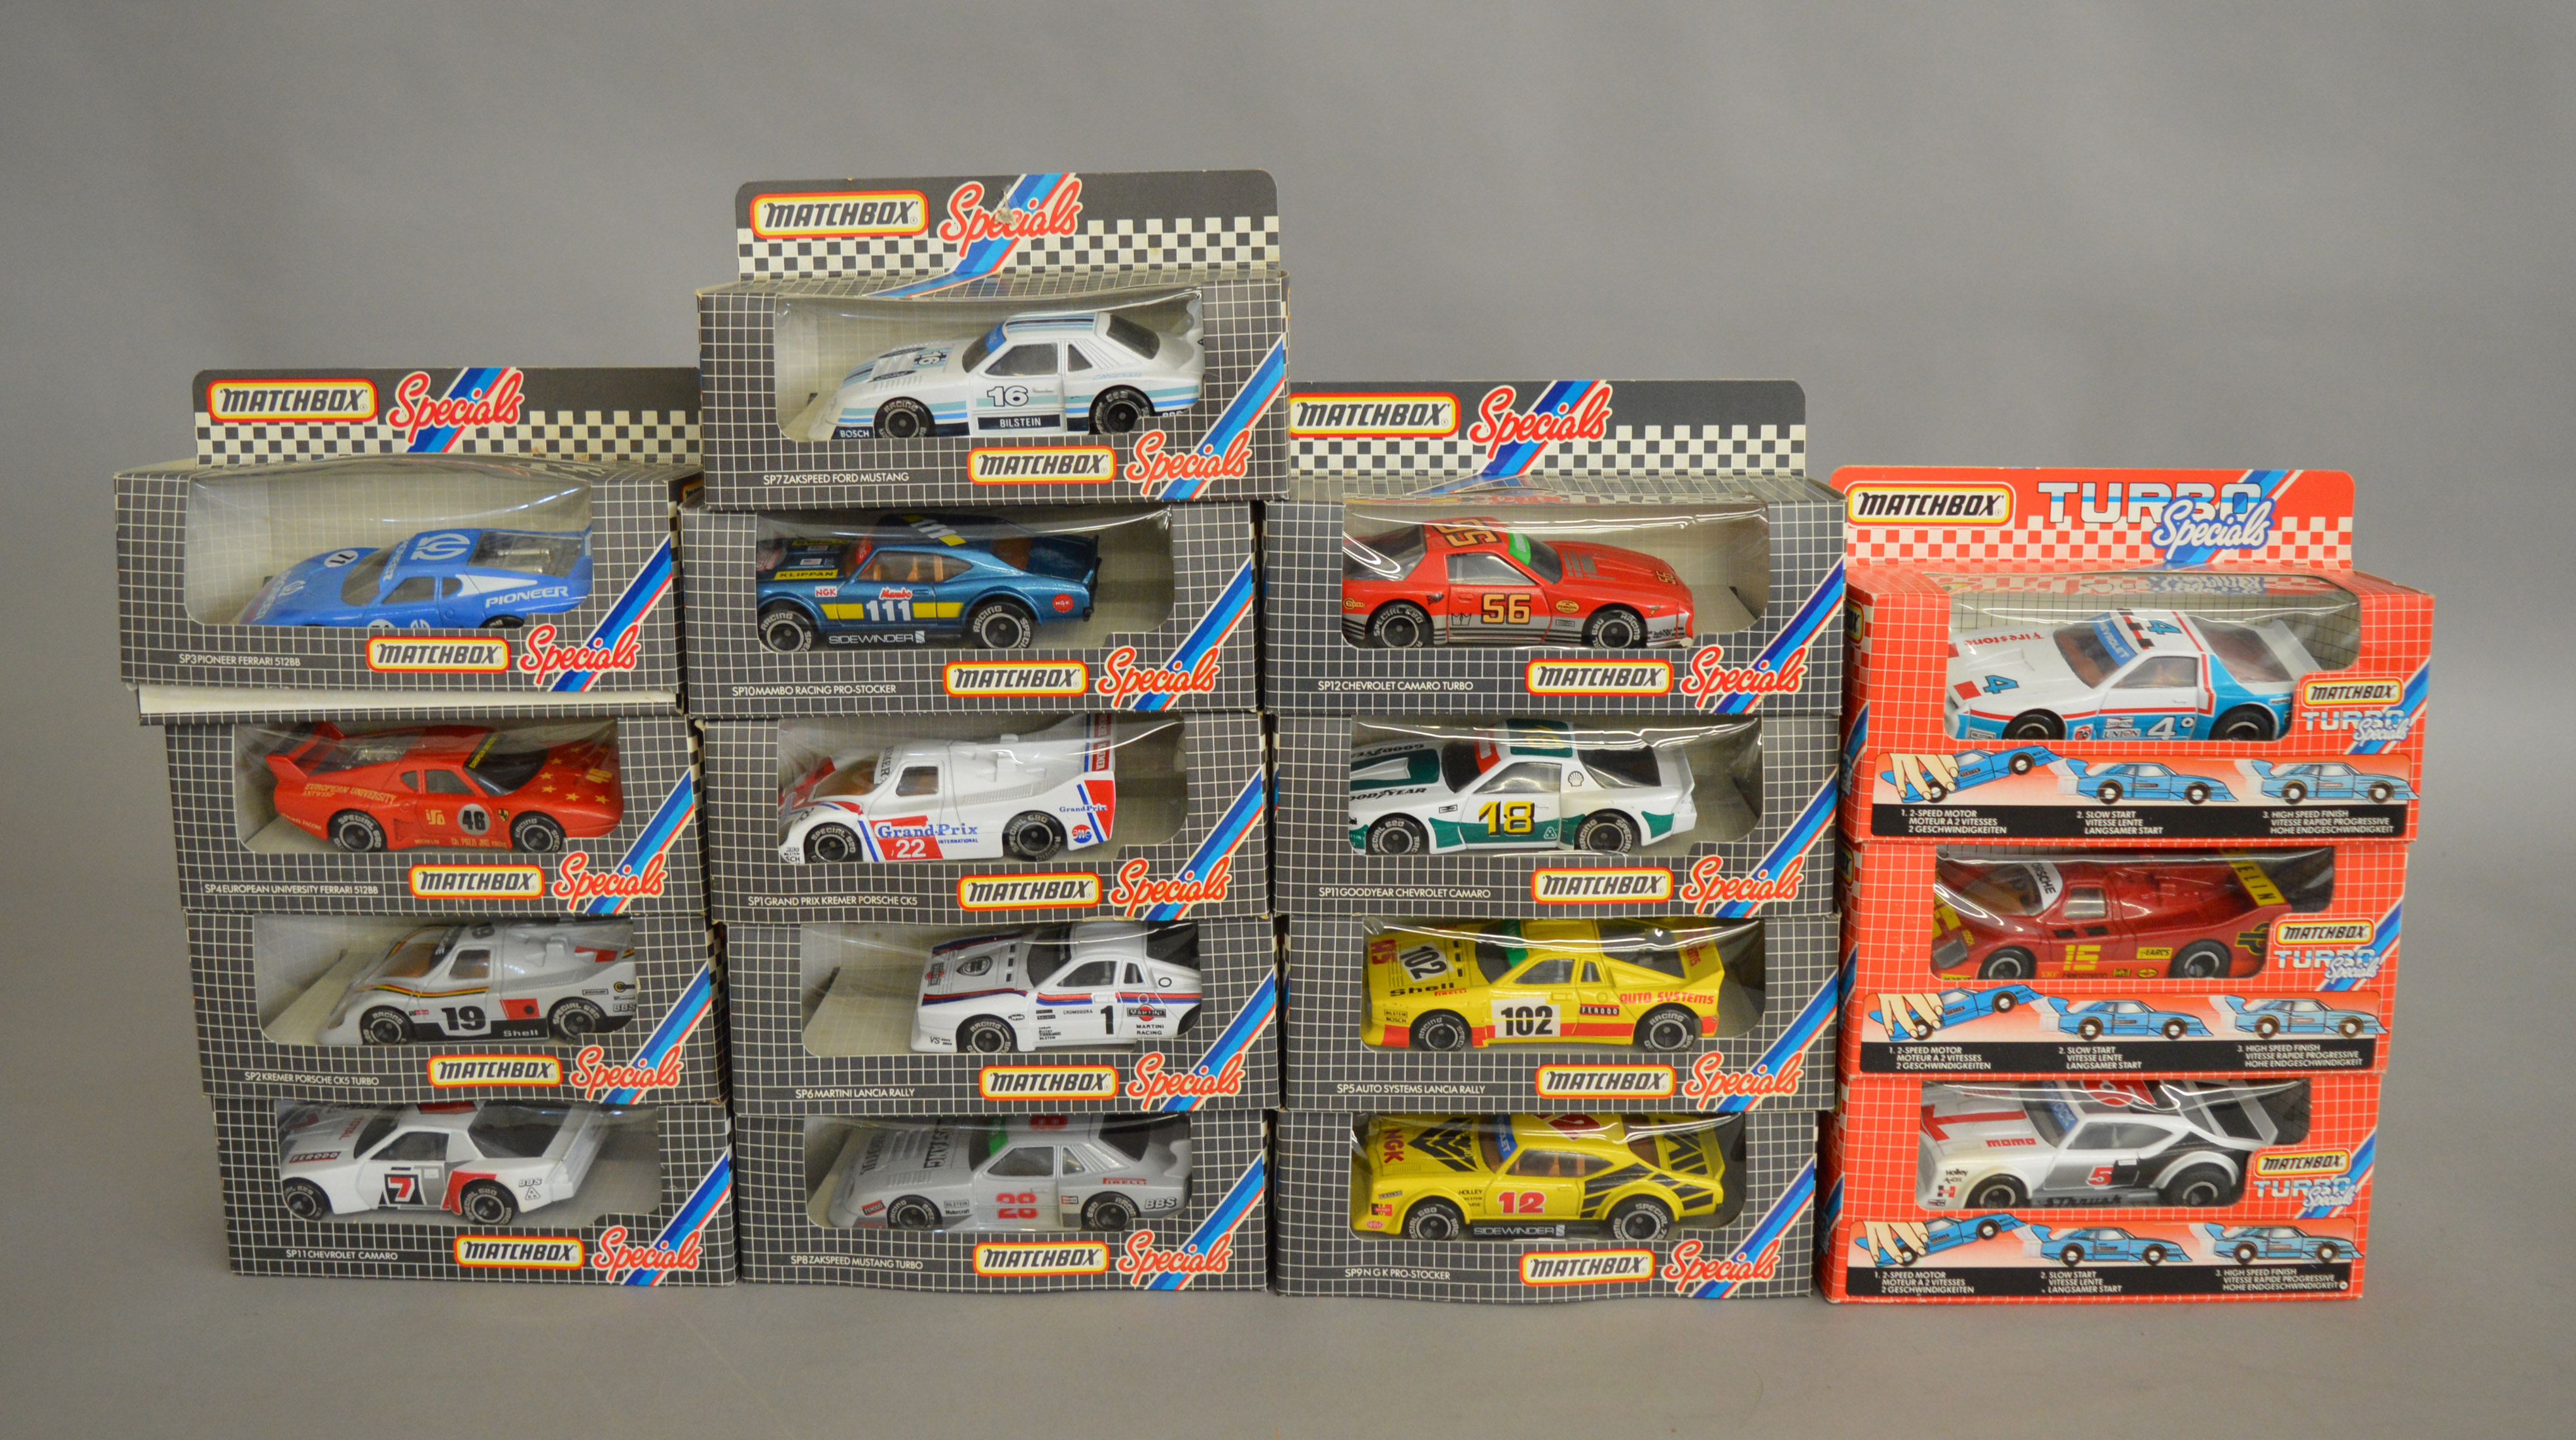 16 Matchbox models from the 'Specials' and 'Turbo Specials' ranges, all in window box packaging,